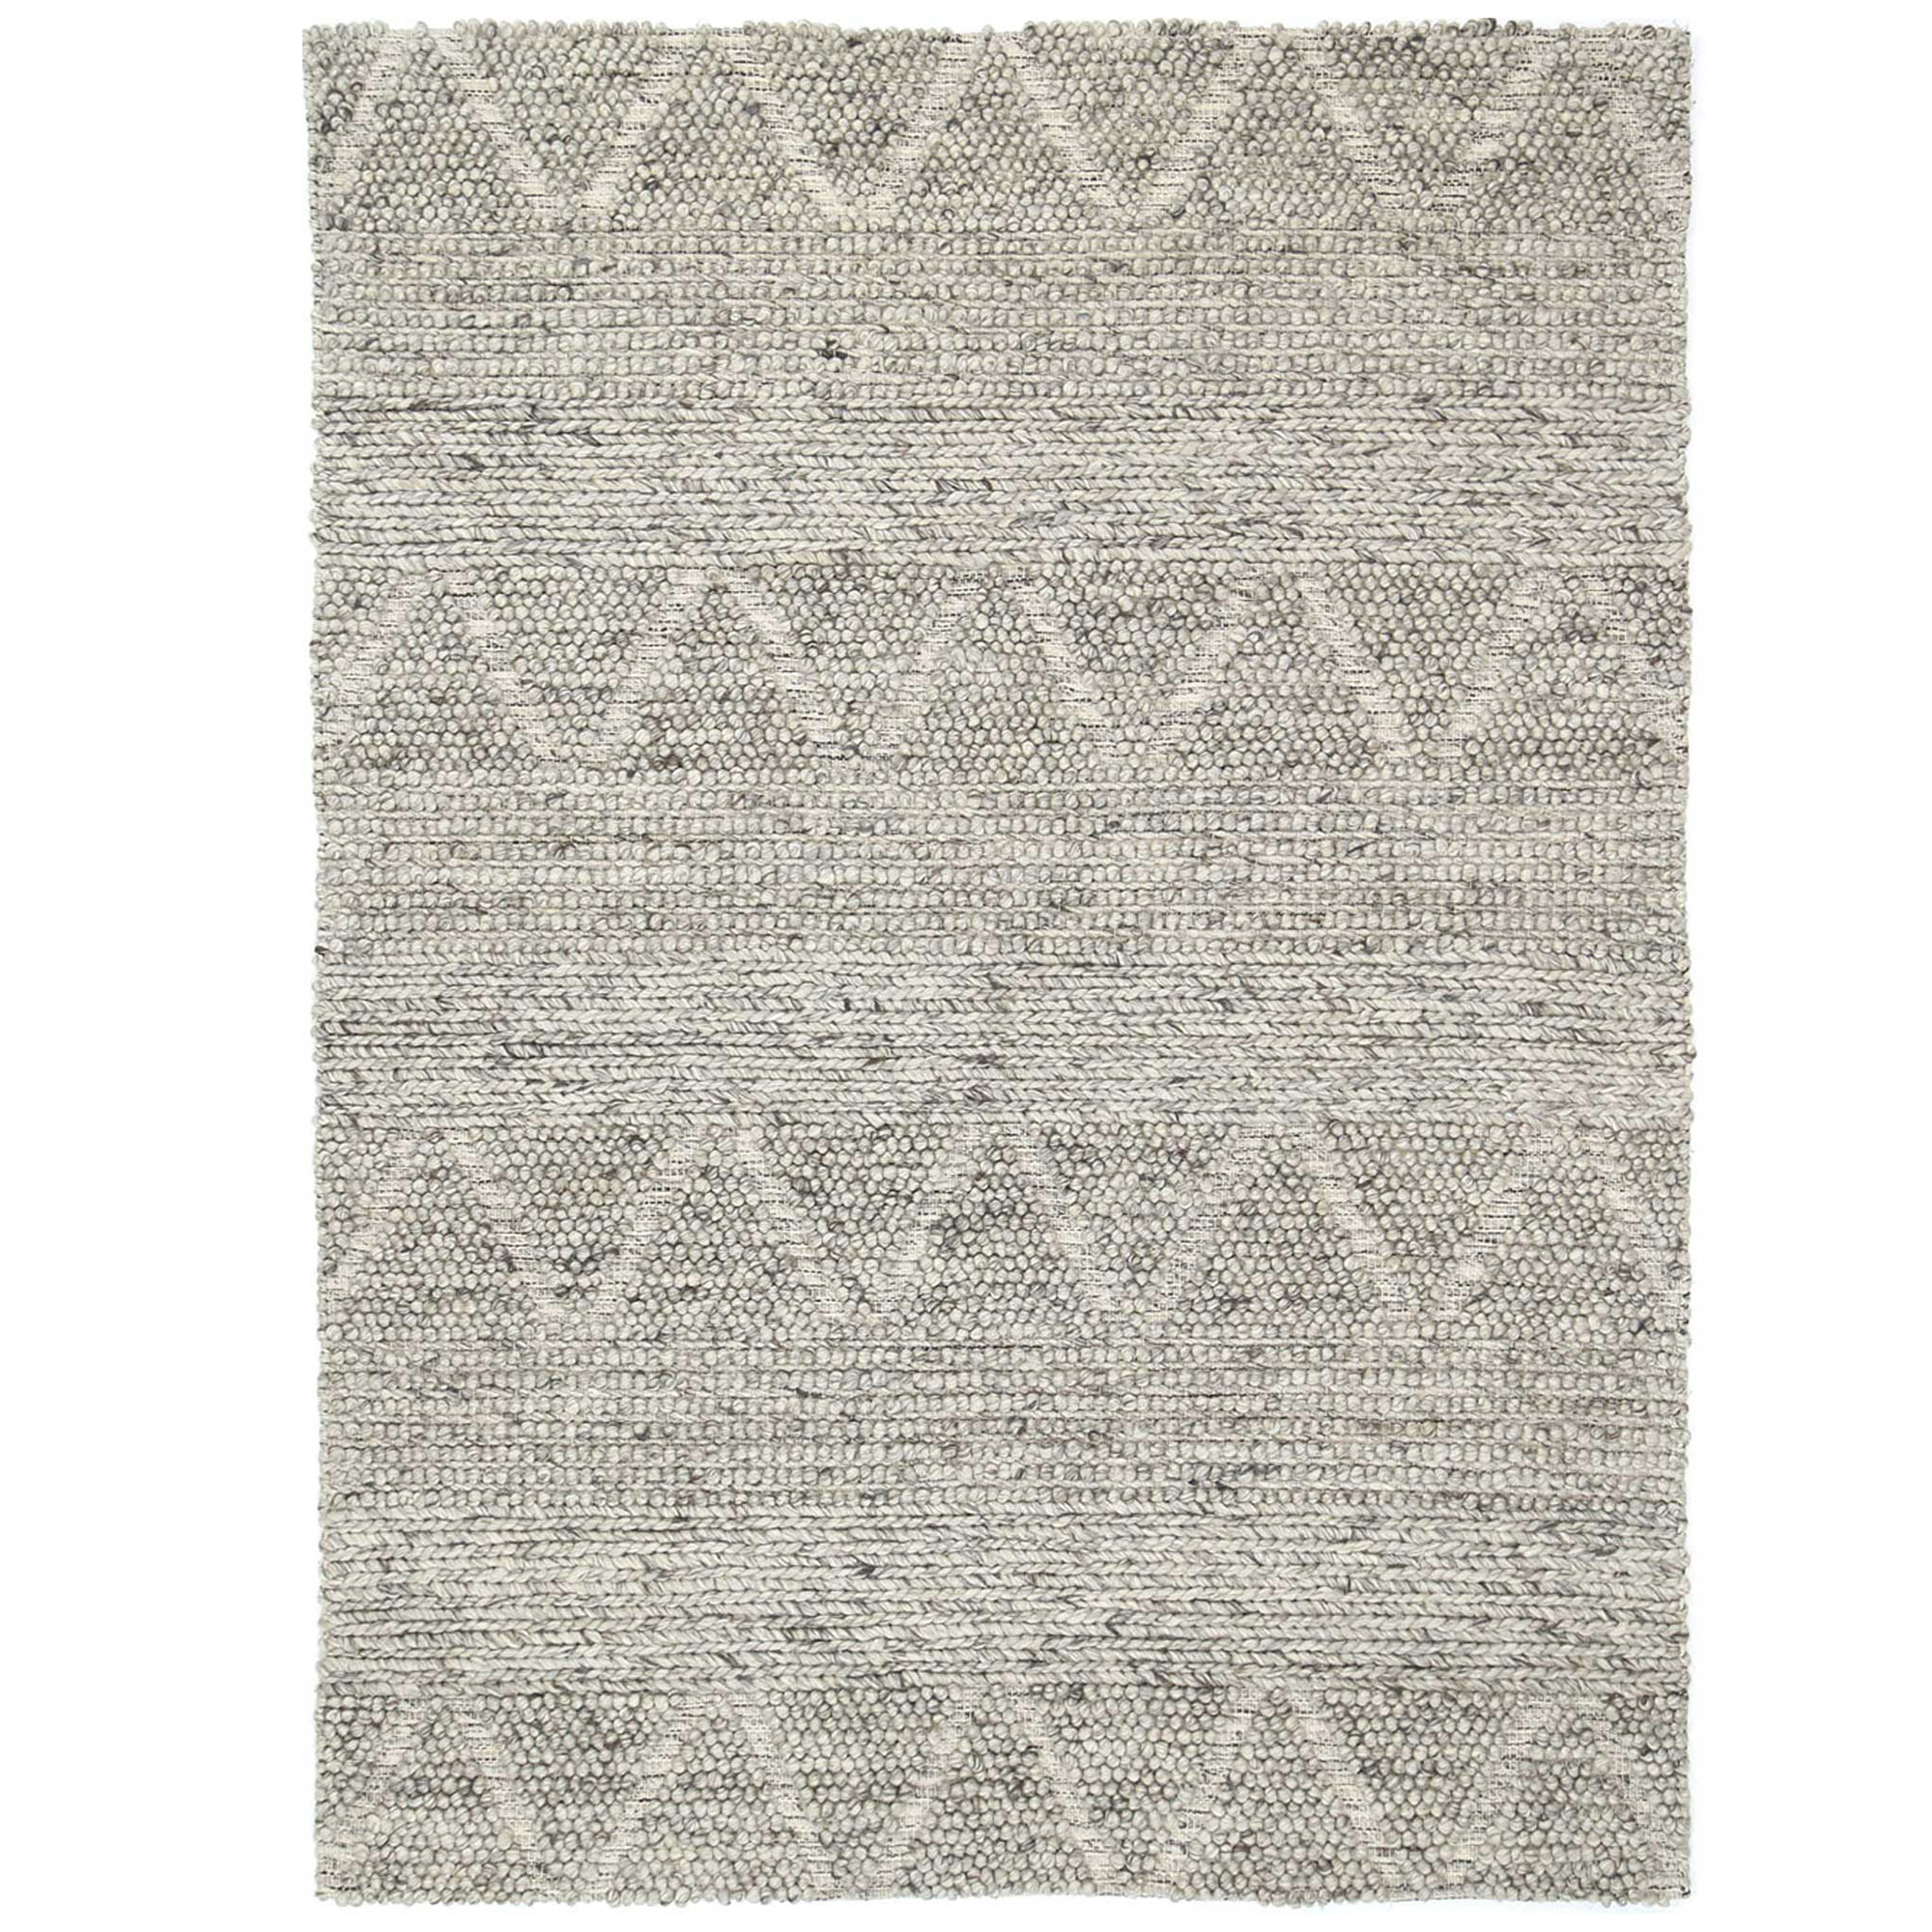 Lifestyle Floors Ash Sawtooth Flat, How To Weave A Wool Rug